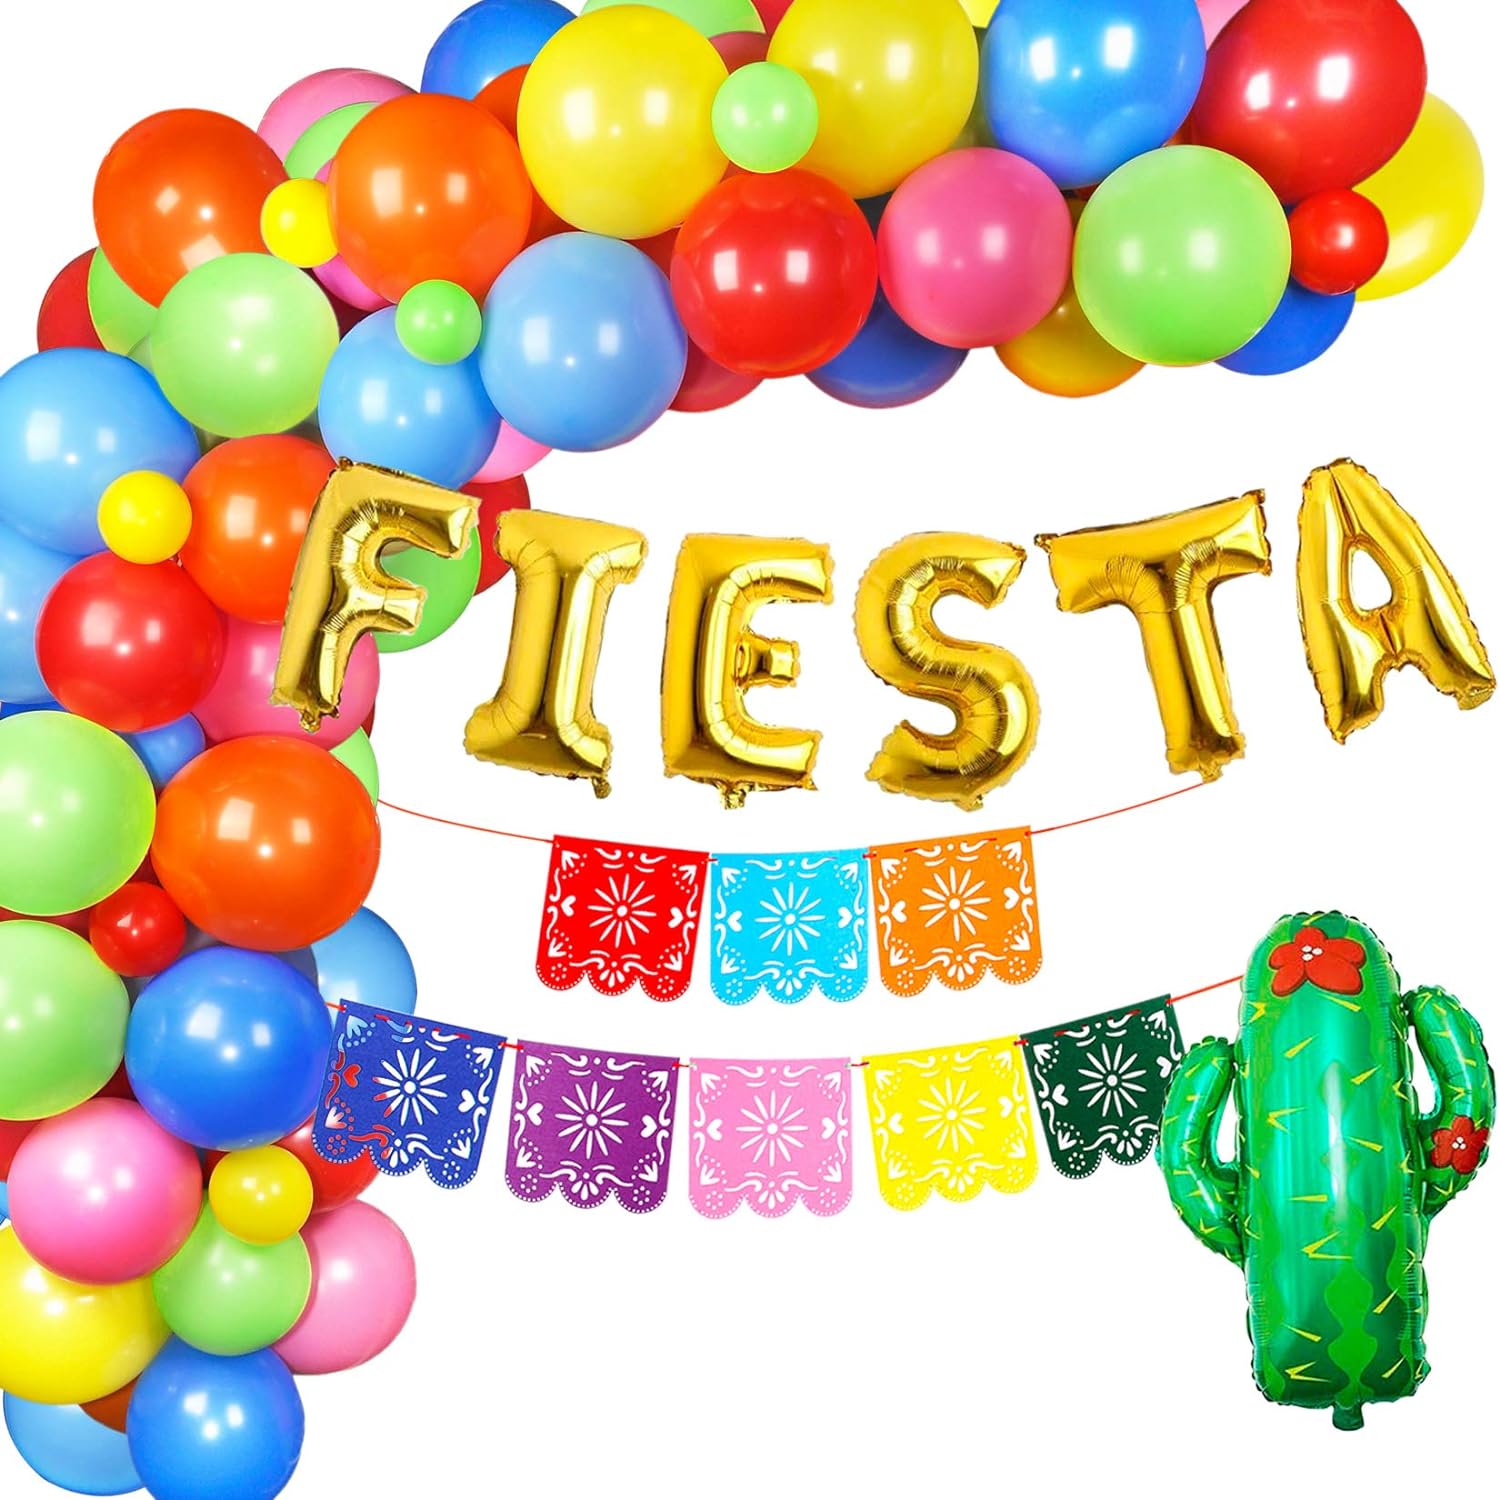 EBD Products Fiesta Party Decorations 112Pcs Fiesta Balloon Garland Kit With Cactus Balloon, Fiesta Foil Balloons For Mexican Party, ?